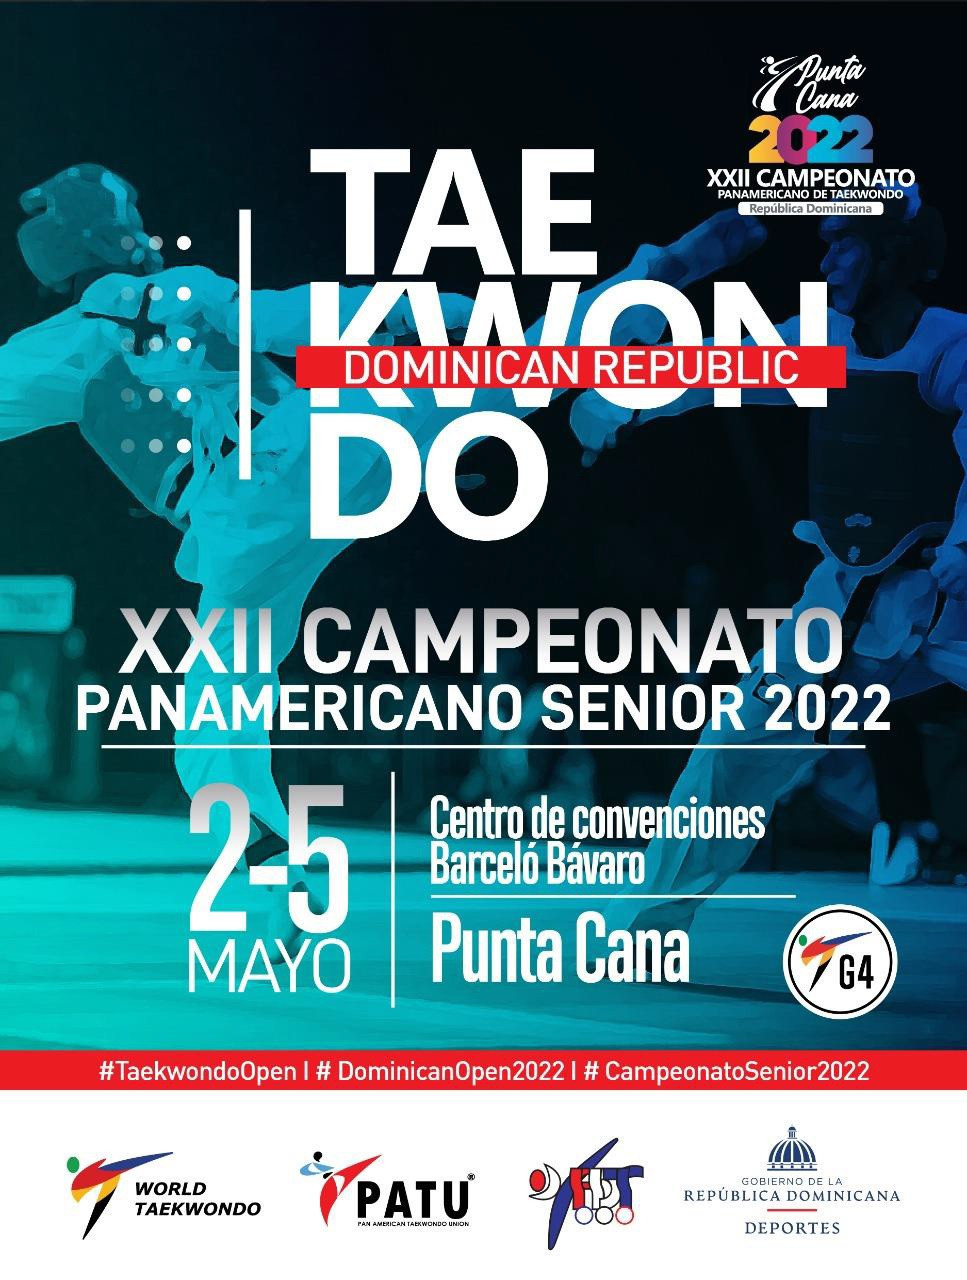 Punta Cana is set to host the Pan American Taekwondo Championships for the first time and the second in the Dominican Republic ©PATU